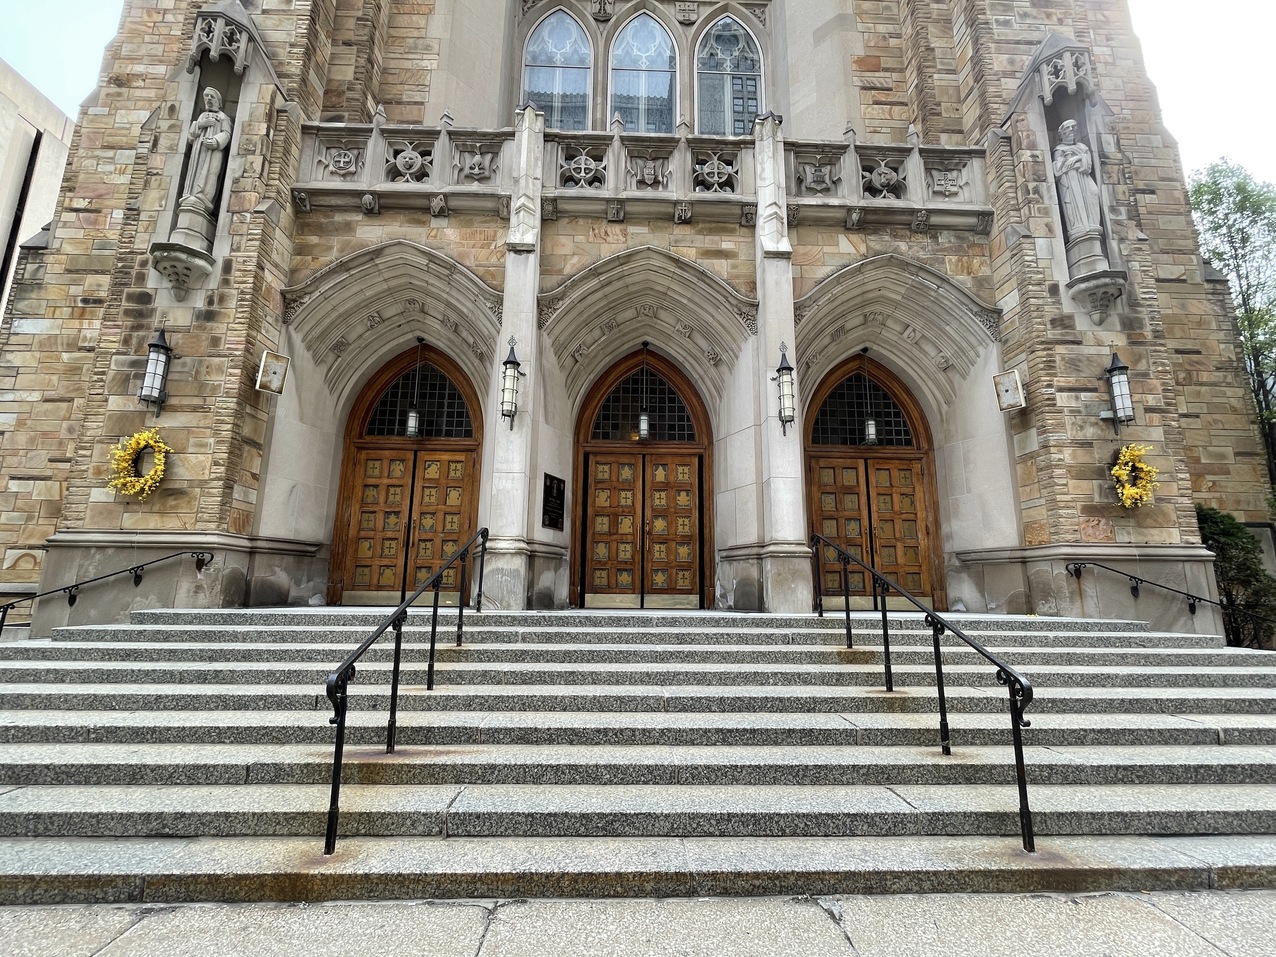 Extensive exterior renovation work underway on Cathedral of St. John the Evangelist